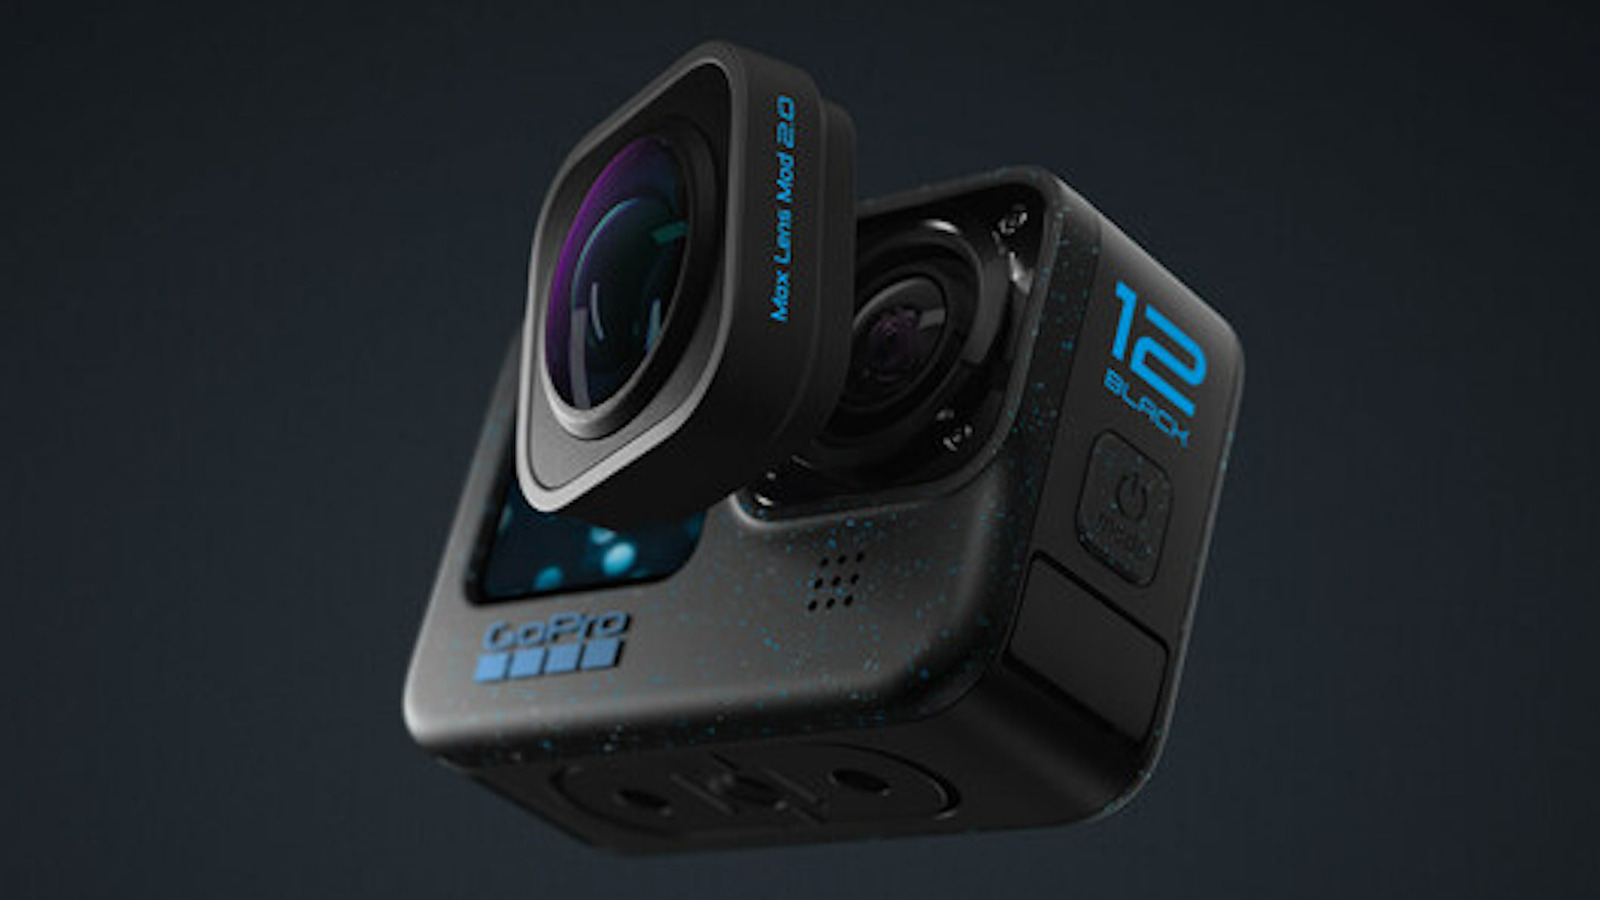 GoPro Max 2 is confirmed as coming, but what do we know so far?